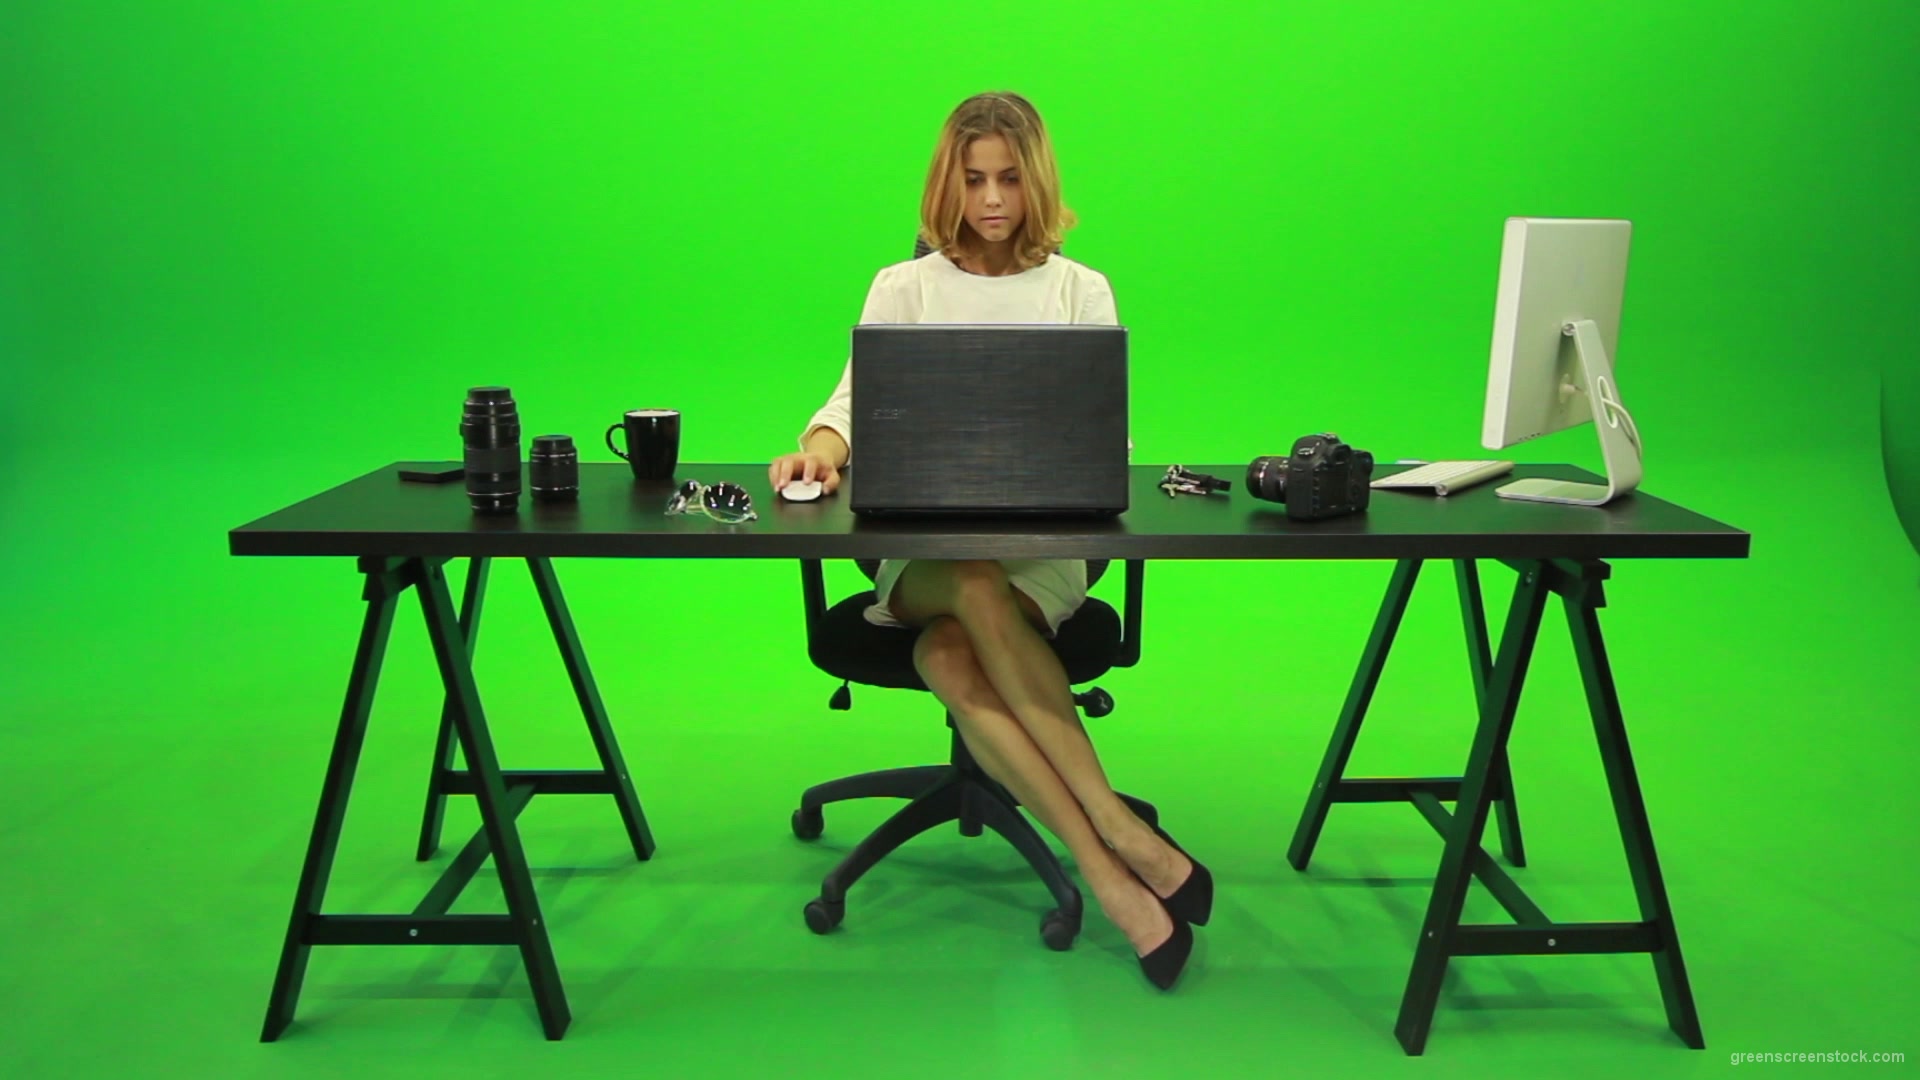 Business-Woman-Working-in-the-Office-2-Green-Screen-Footage_004 Green Screen Stock